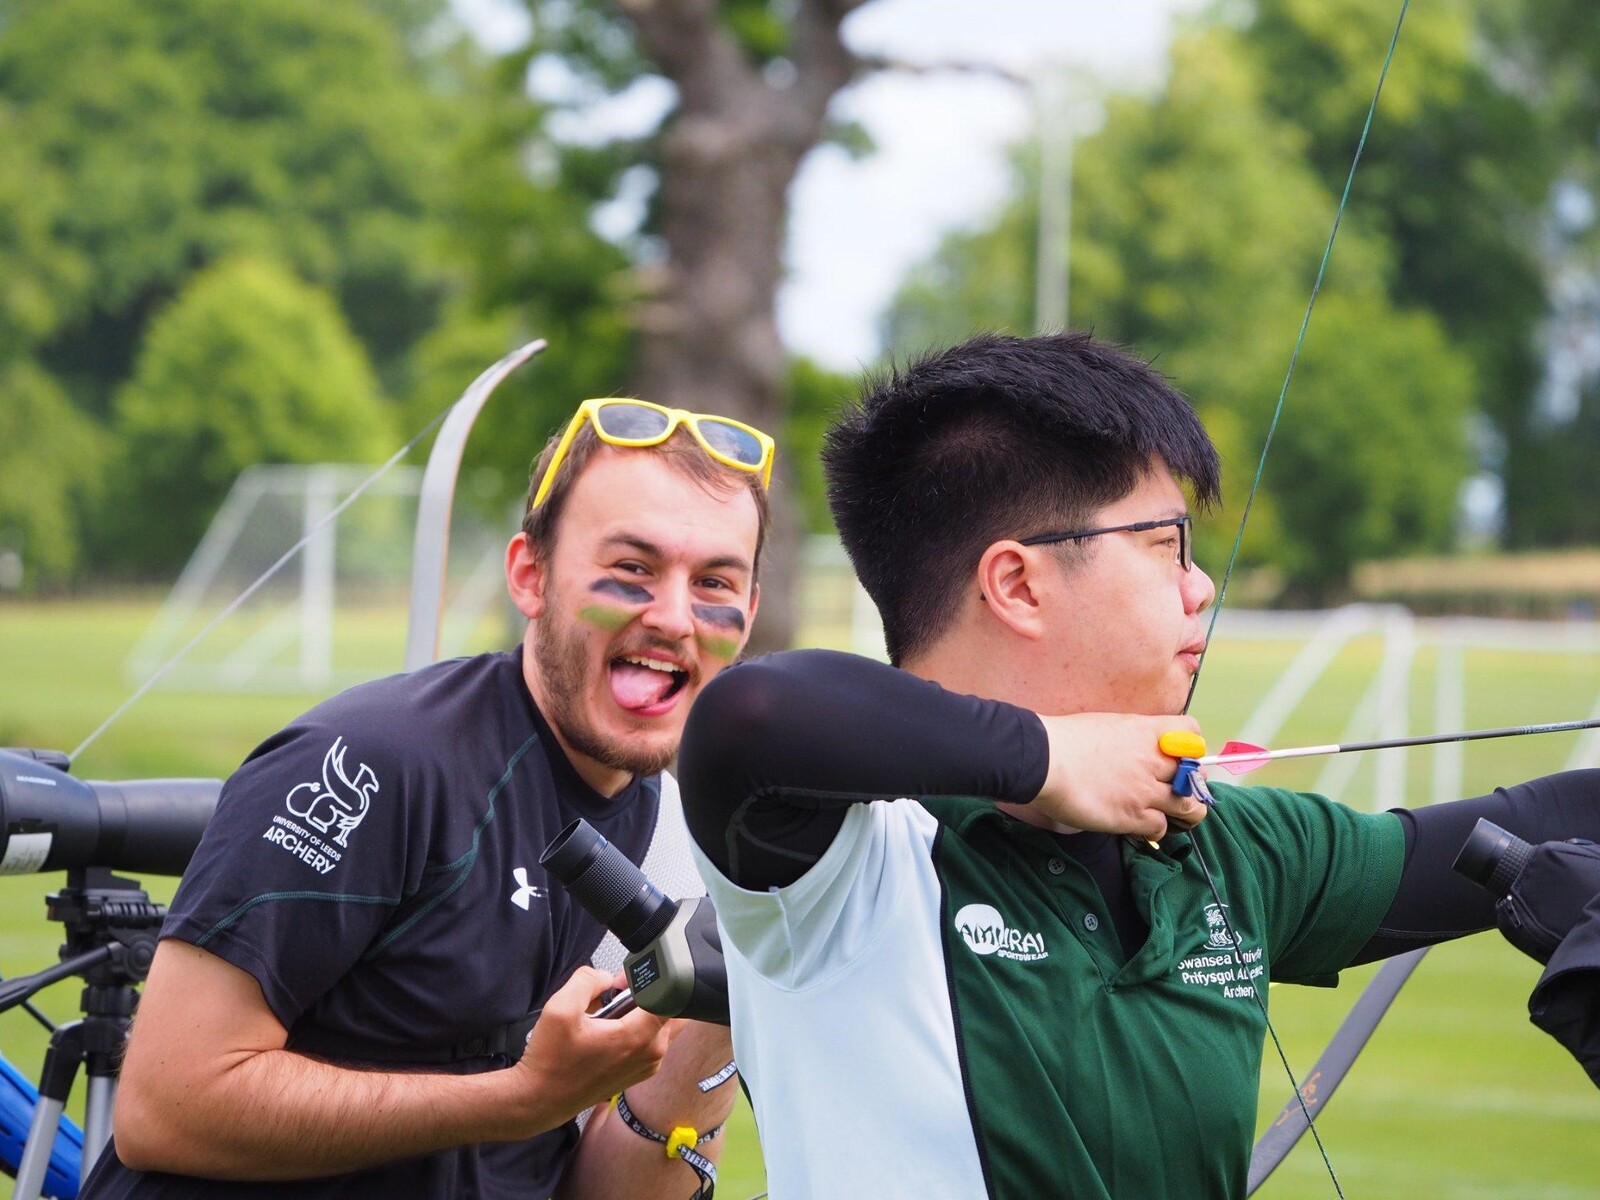 University archers at a competition